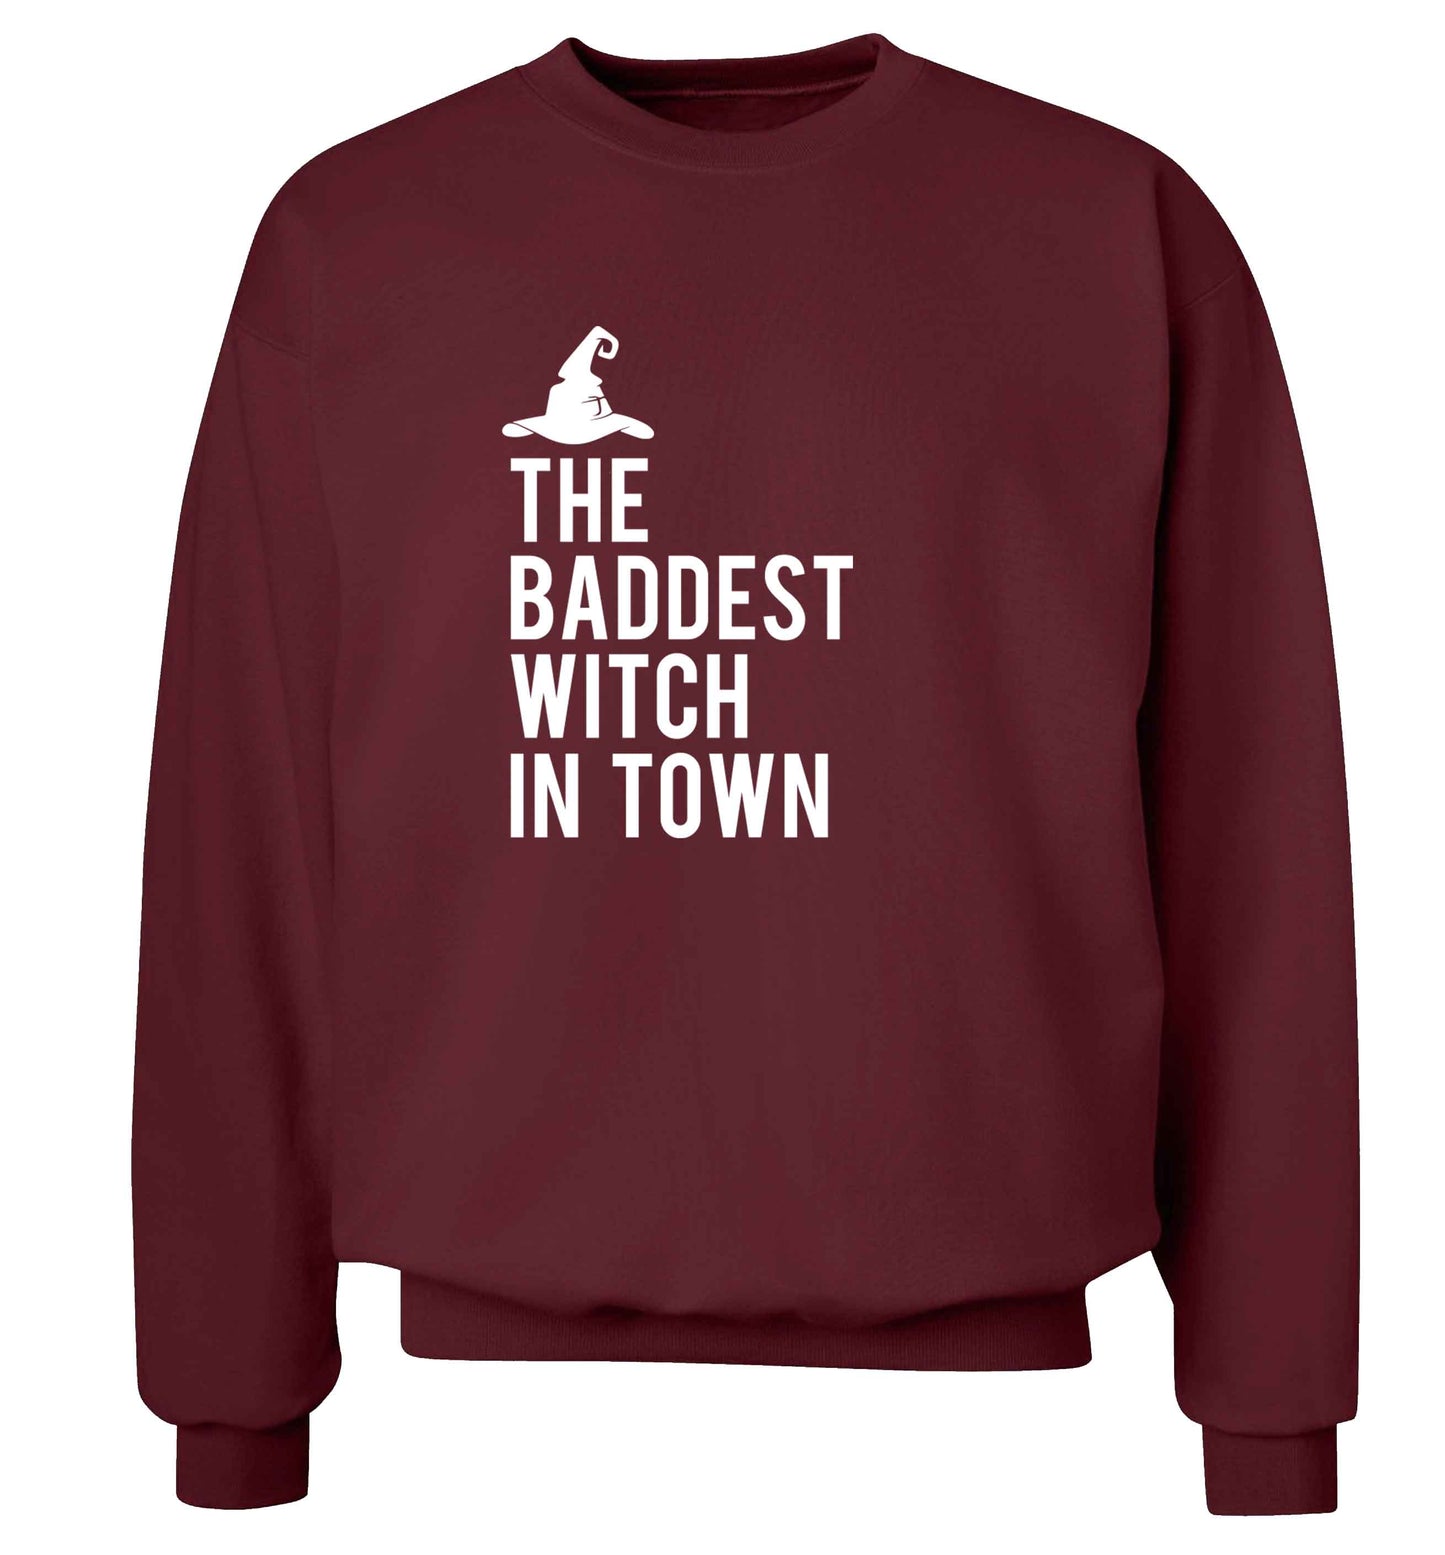 Badest witch in town adult's unisex maroon sweater 2XL